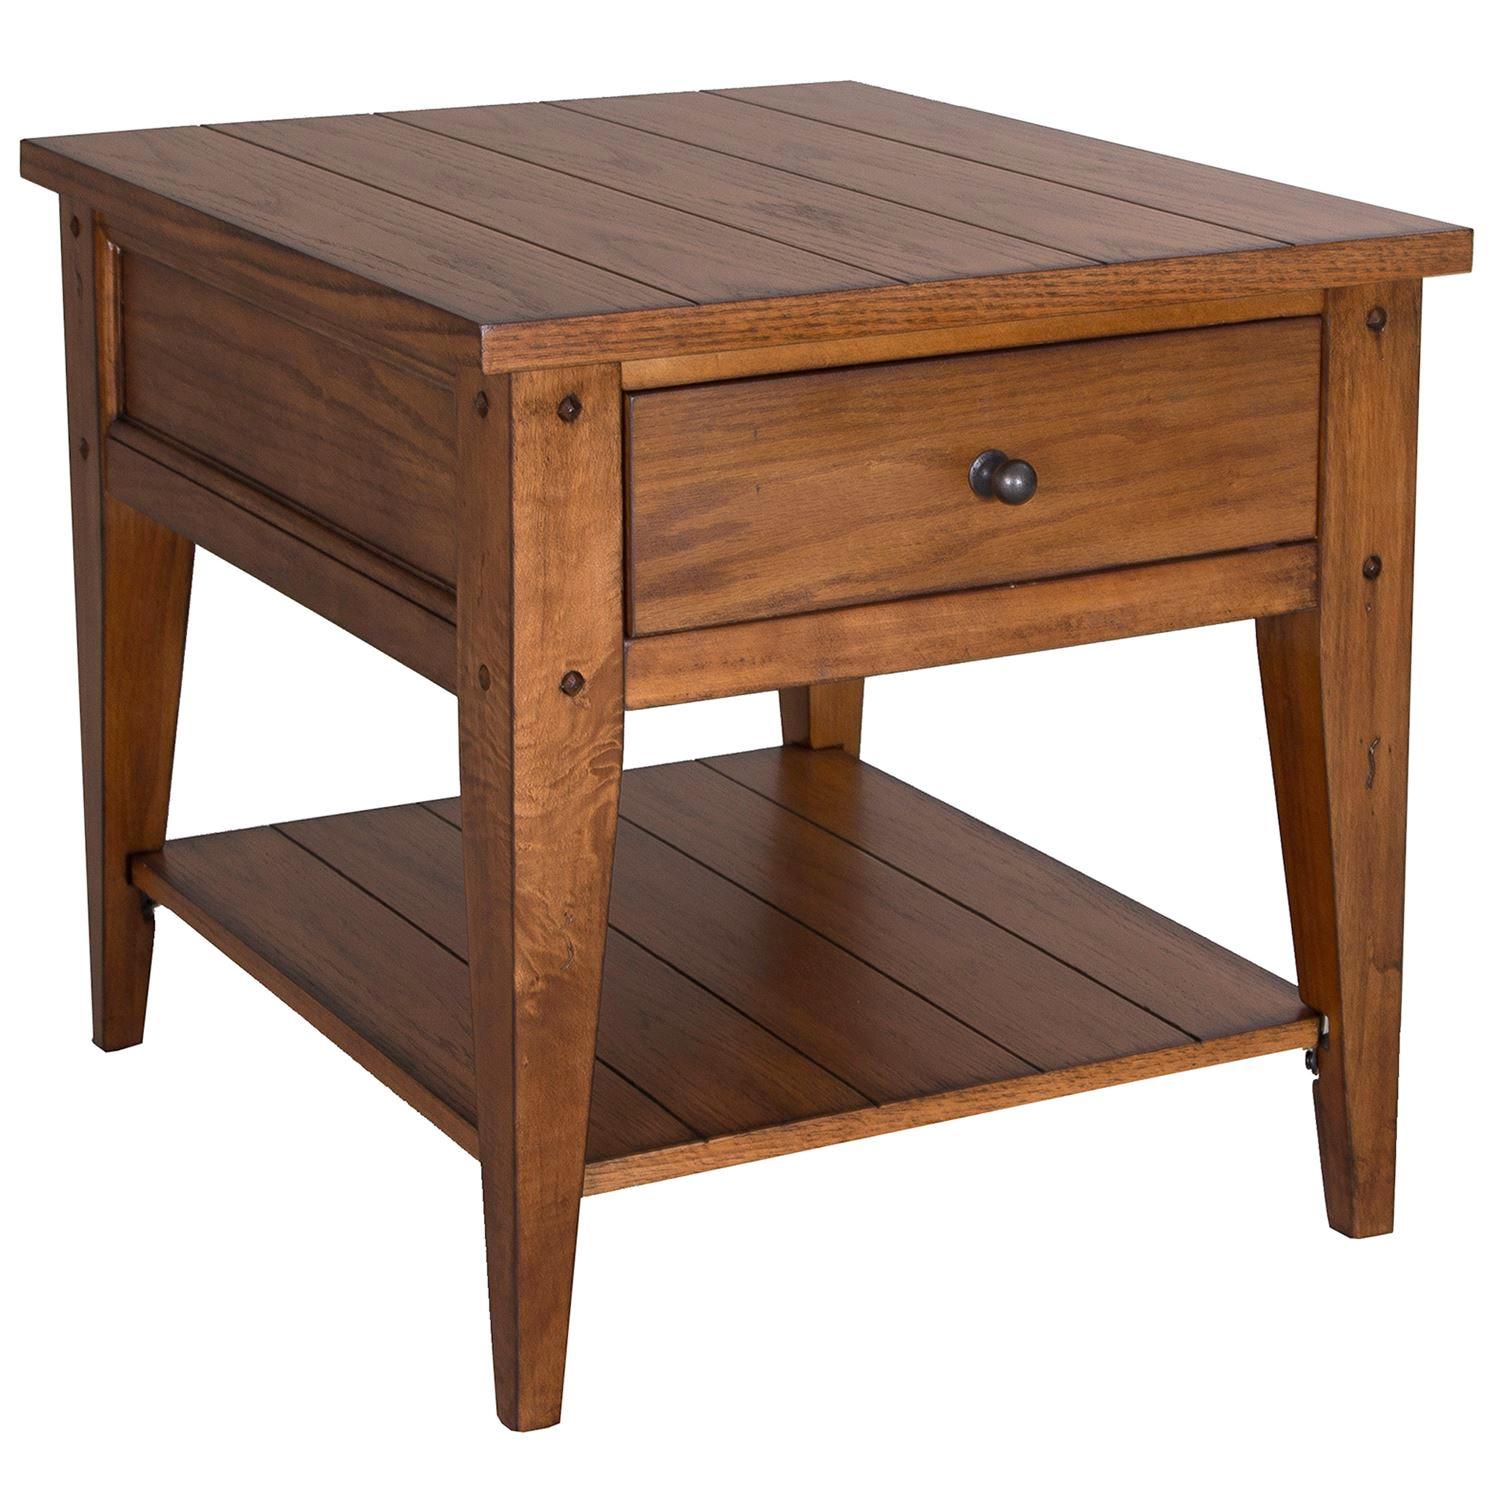 Rustic End Table Lake House  (110-OT) End Table 110-OT1020 in Oak Veneers, Brown Lacquer